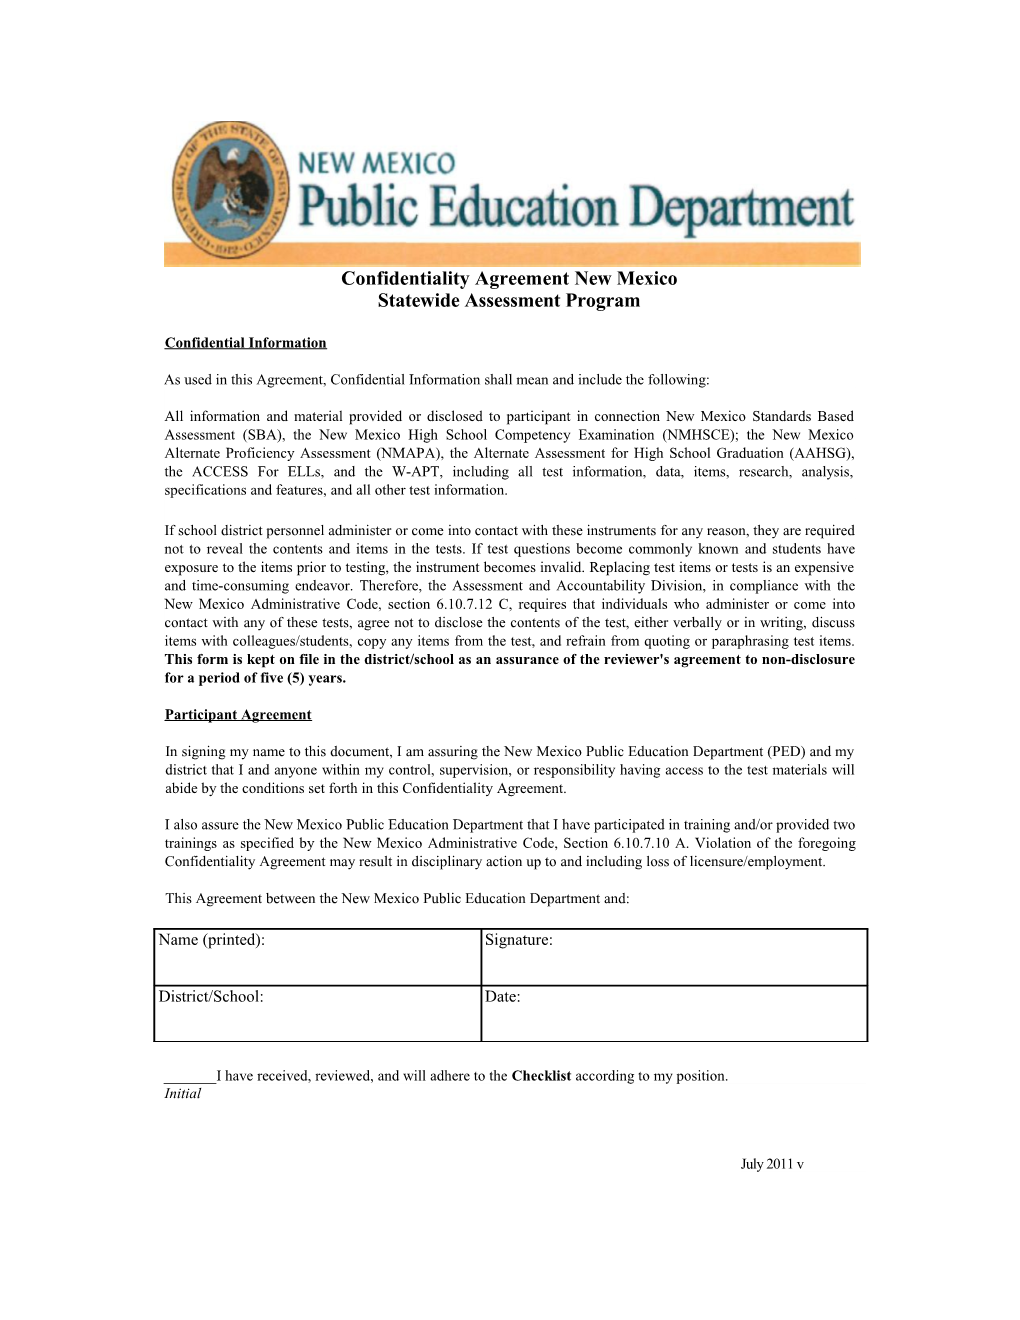 Confidentiality Agreement New Mexico Statewide Assessment Program